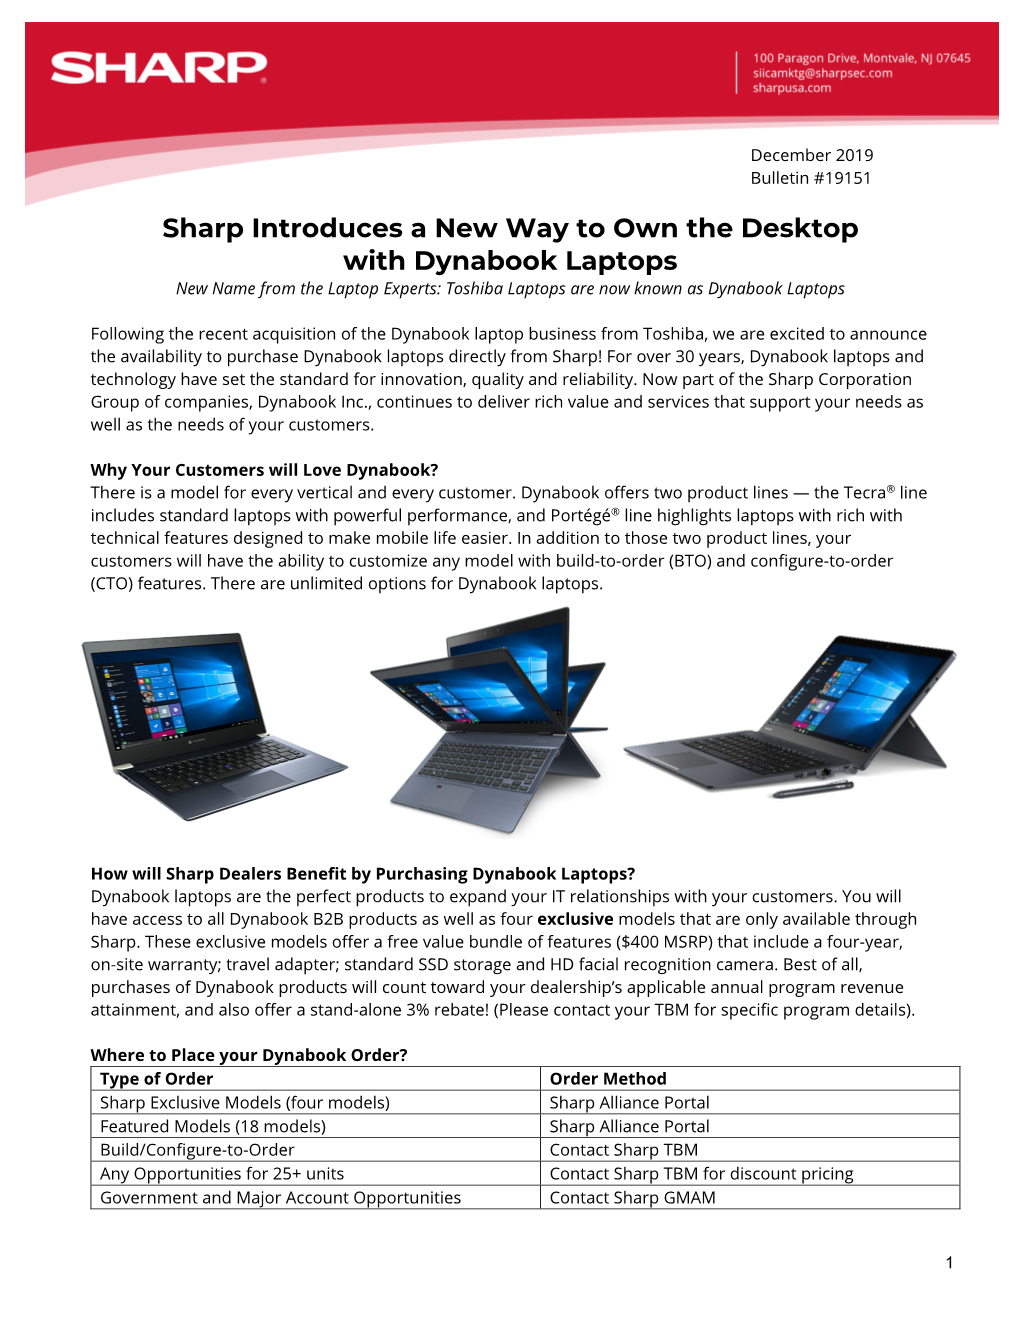 Sharp Introduces a New Way to Own the Desktop with Dynabook Laptops New Name from the Laptop Experts: Toshiba Laptops Are Now Known As Dynabook Laptops